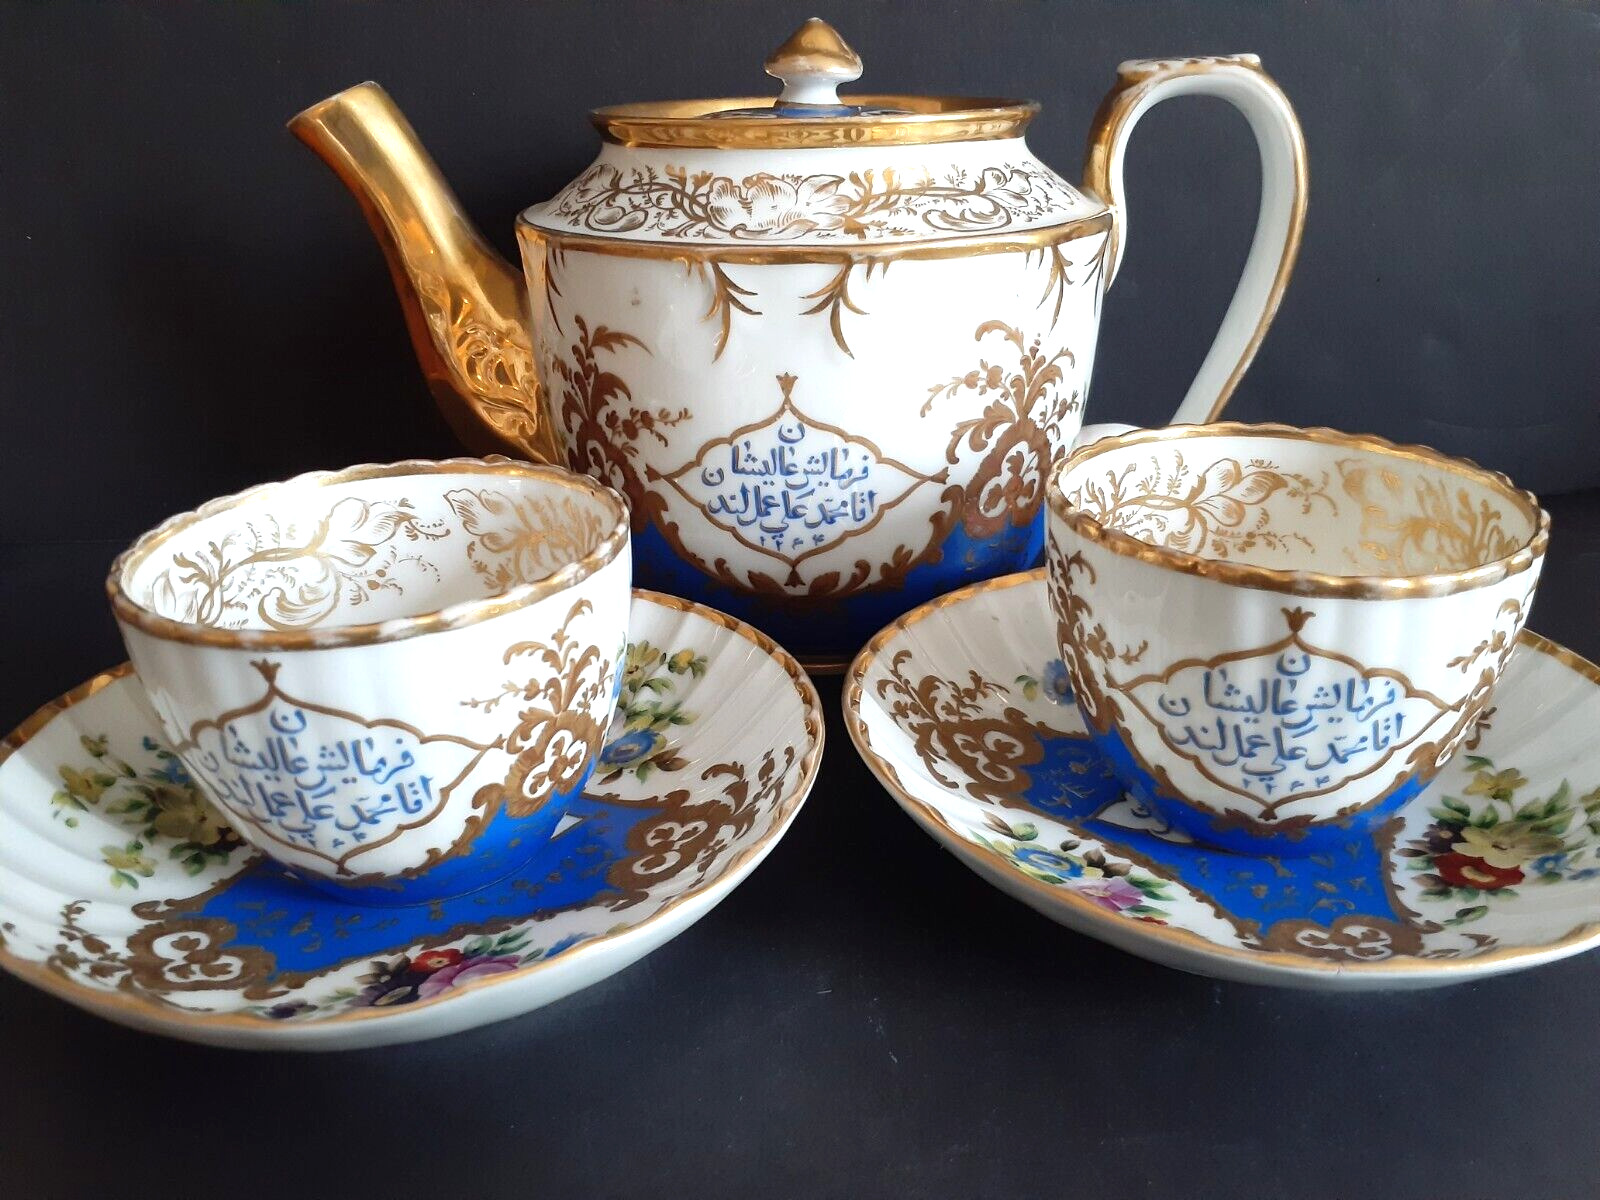 Rare 19th C. Imperial Russian Gardner Tea Set With An Islamic Inscriptions